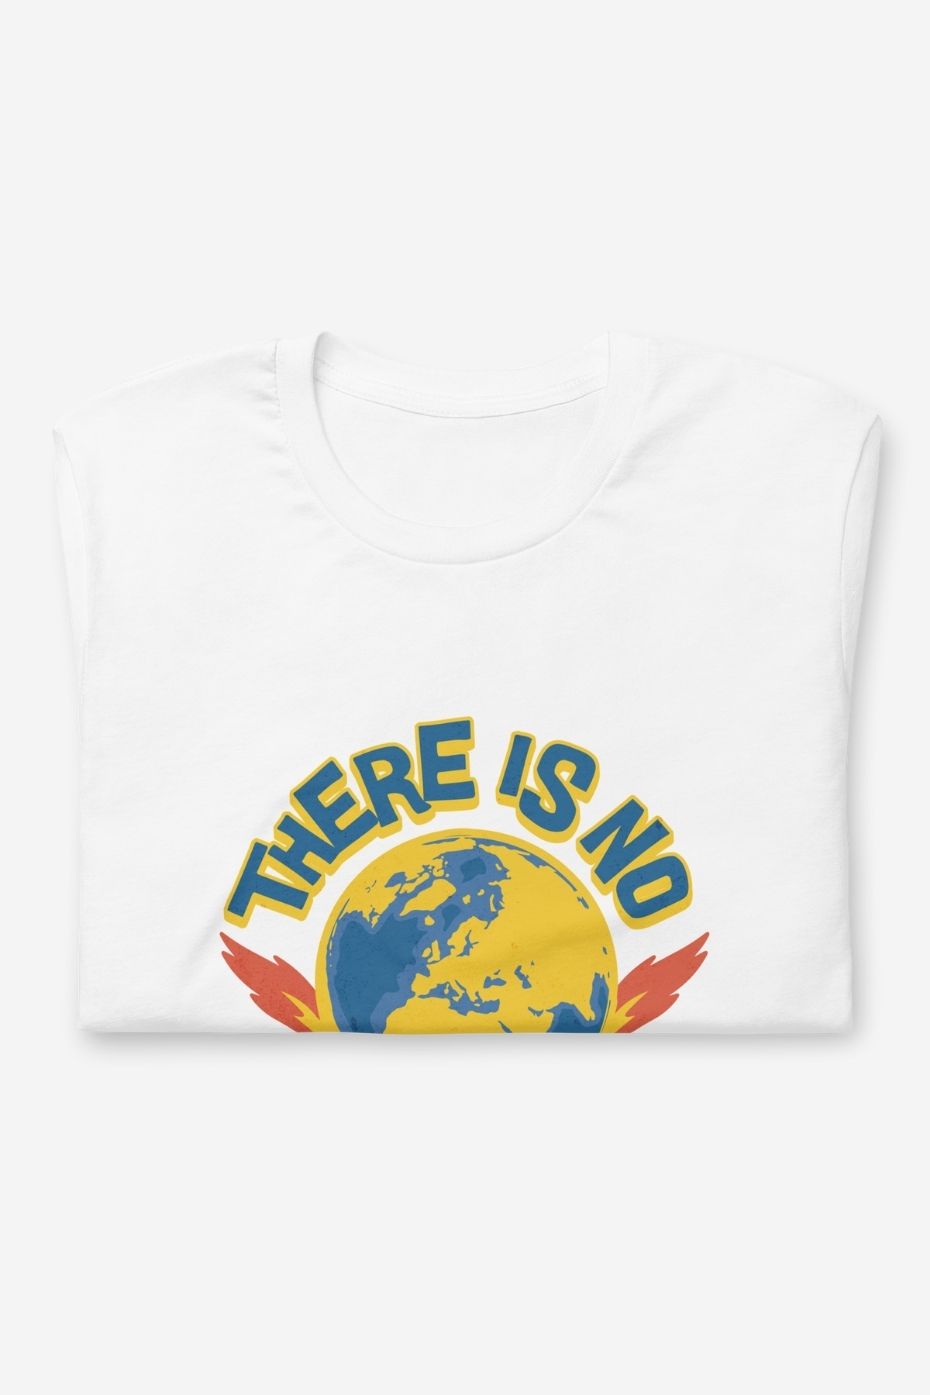 There is No Planet B - Unisex t-shirt